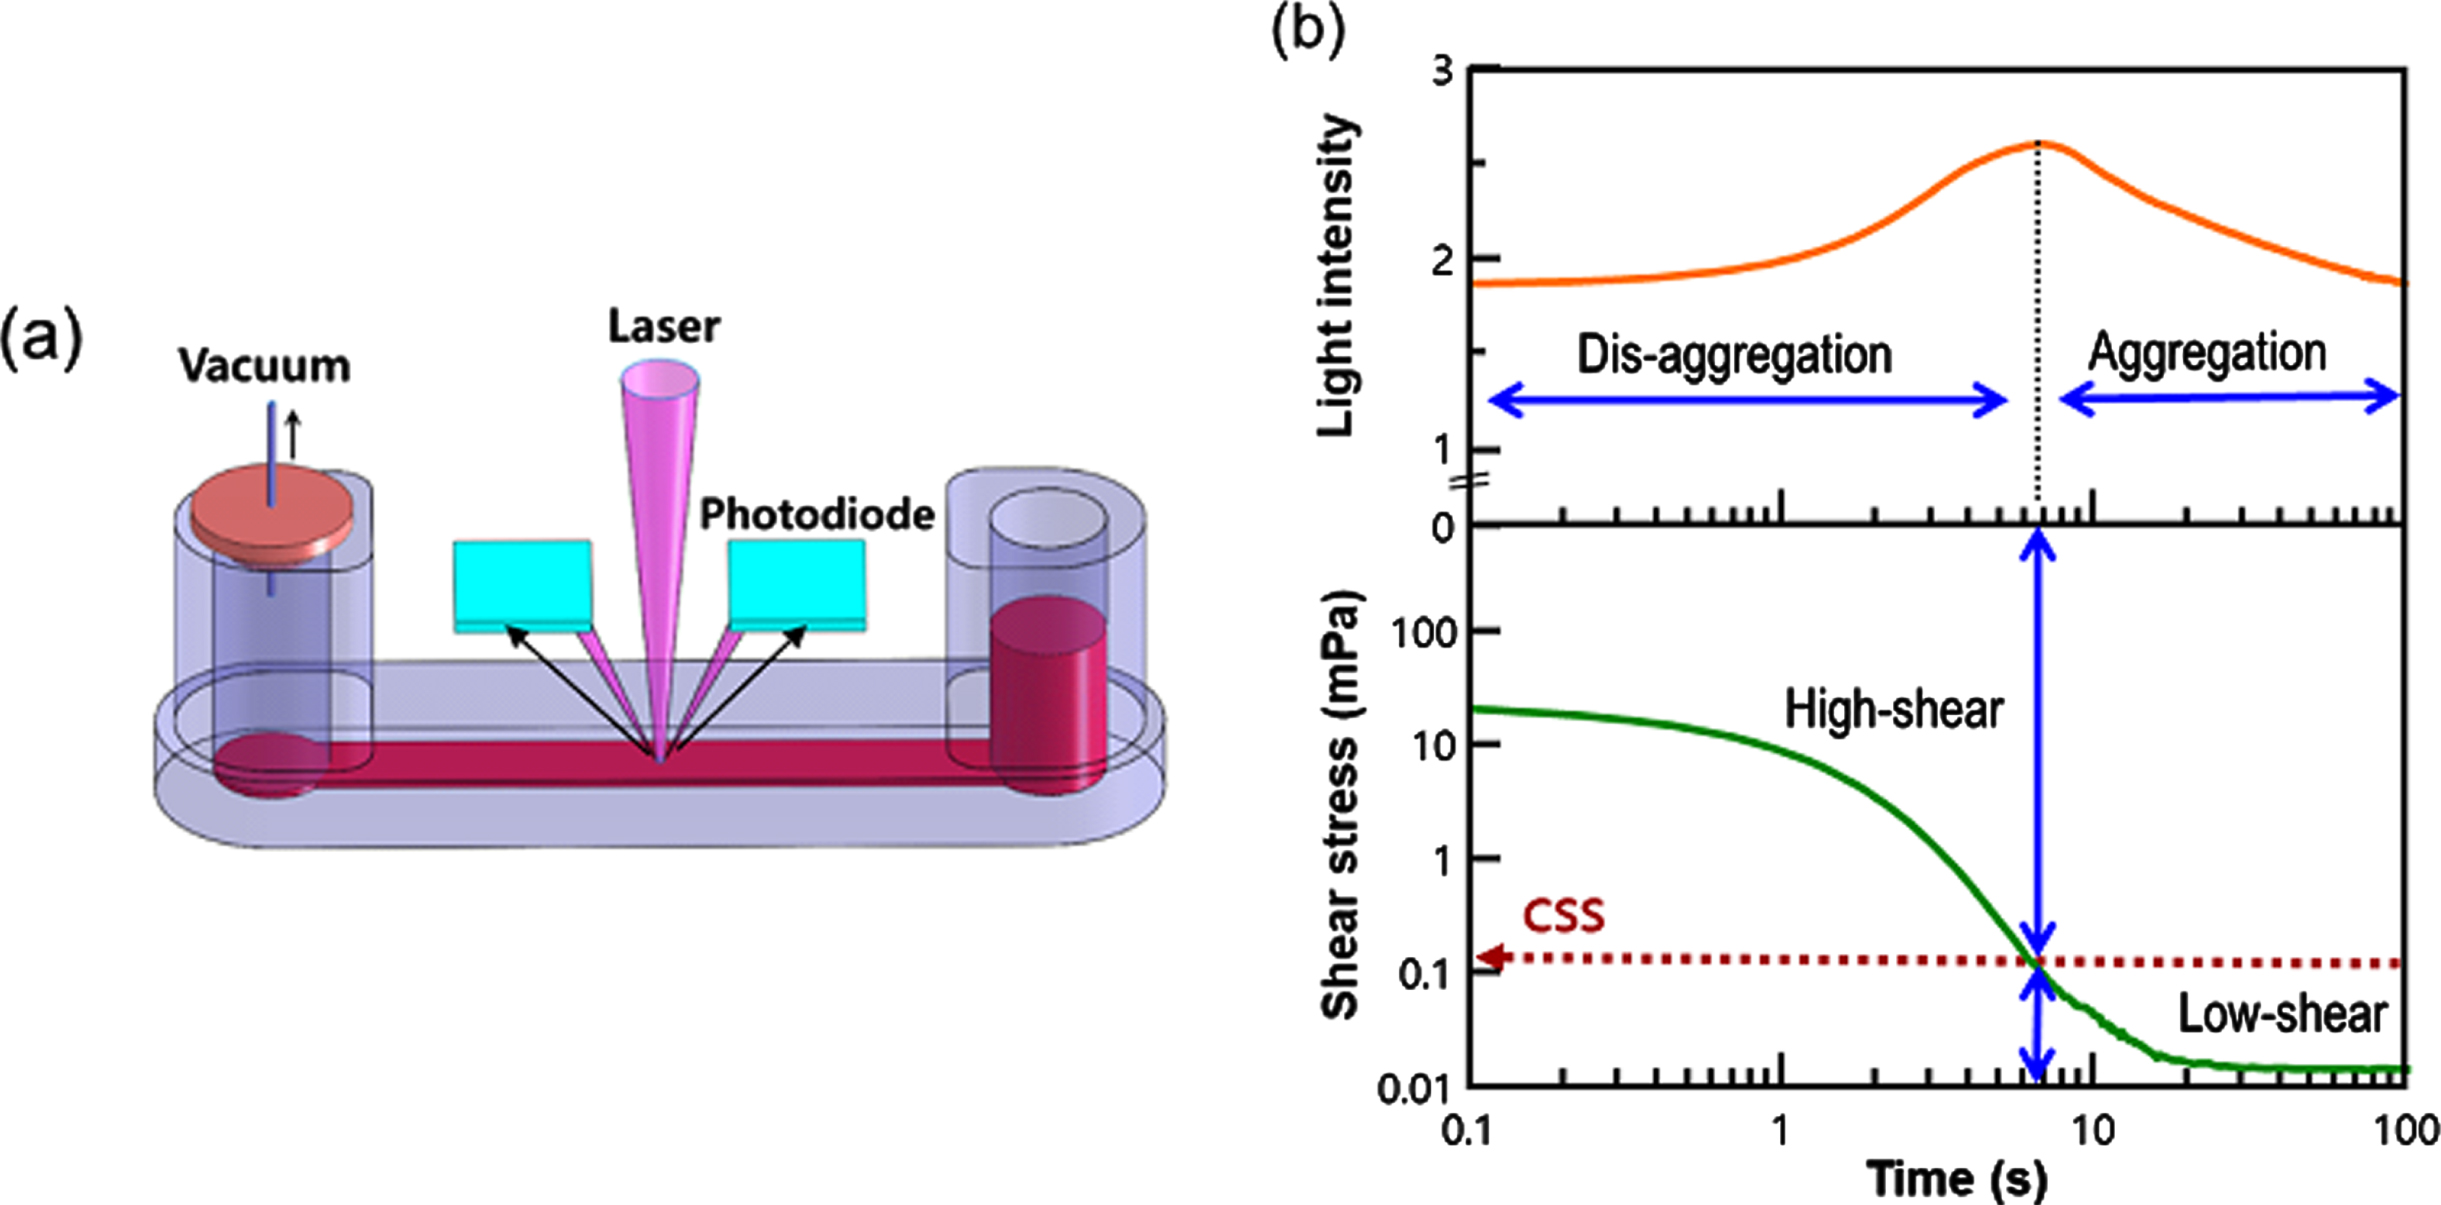 Measurement of CSS in a microfluidic rheometry (a) Disposable microfluidic cartridge holding 500 uL of whole blood, (b) Simultaneous measurements of shear stress and backscattering intensity with respect to time.